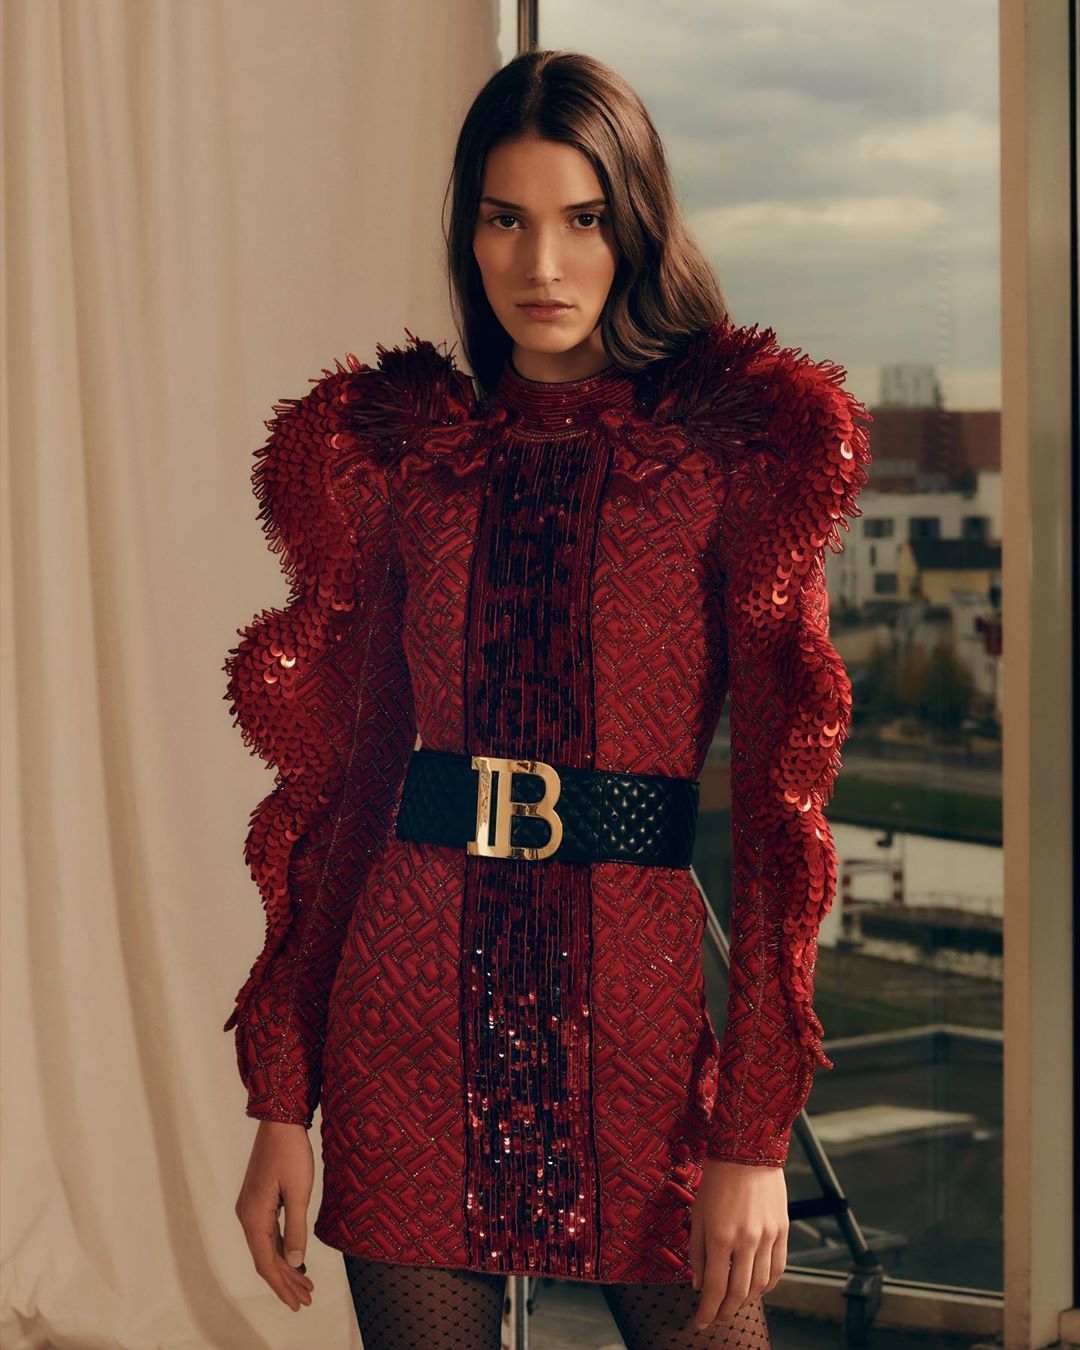 Balmain Red Dress from the Pre-Fall 2019 Balmain Army Collection